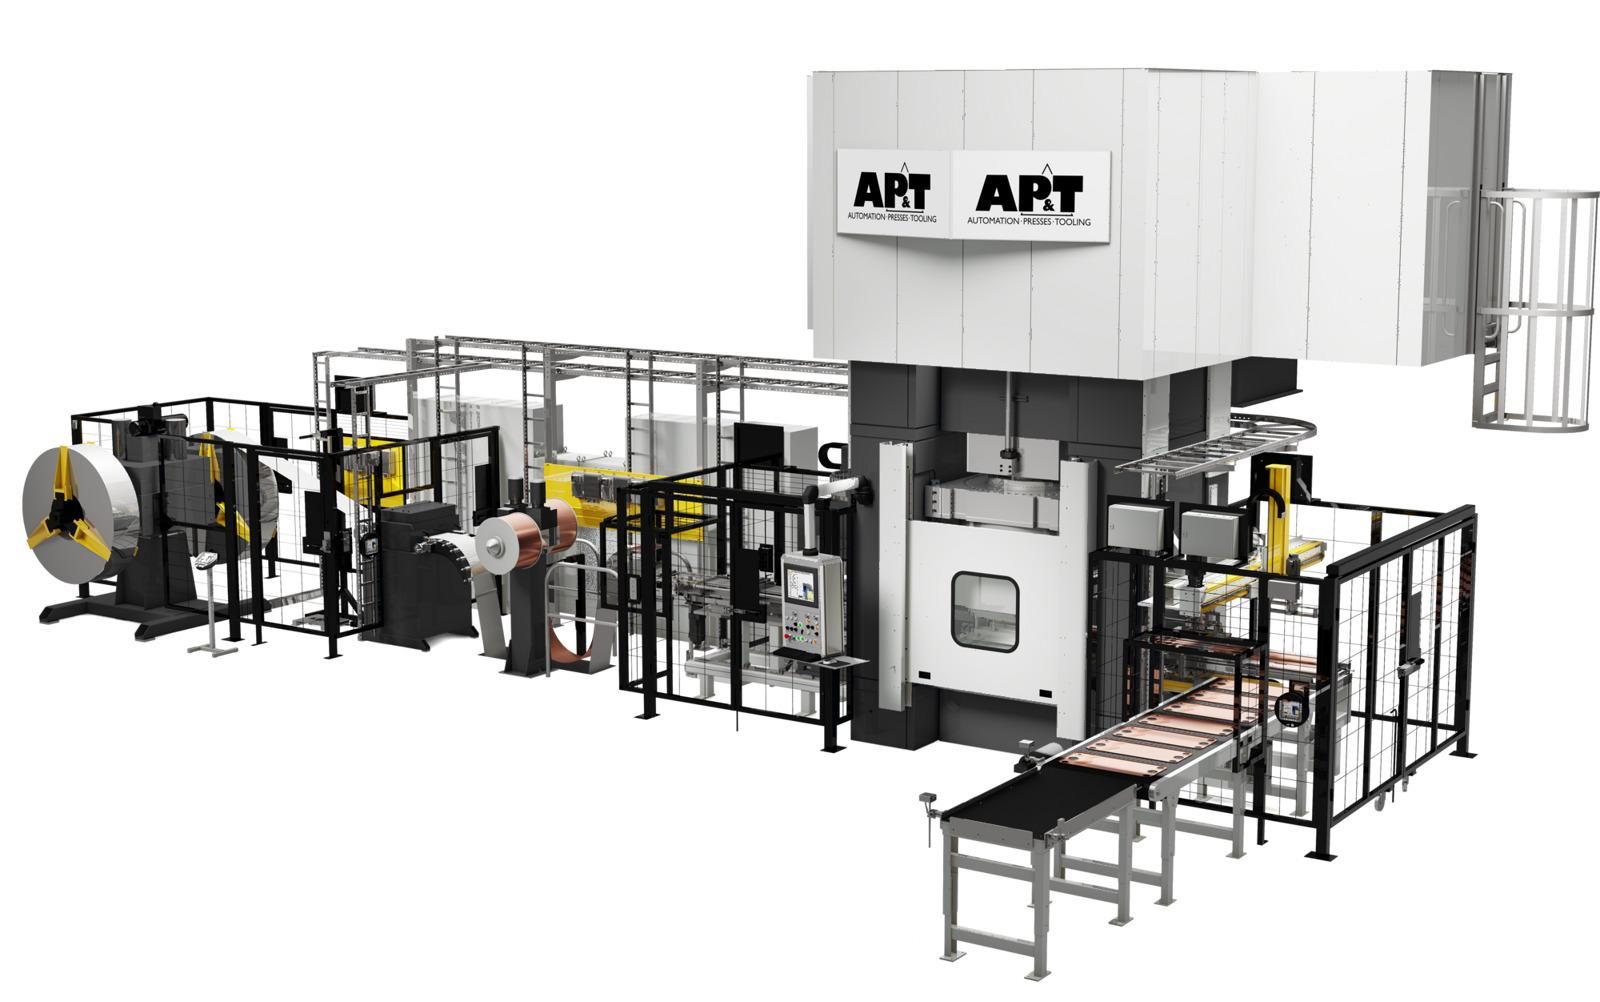 Low energy consumption makes AP&T’s servohydraulic press highly interesting financially and environmentally for heat exchanger plate manufacturers. 